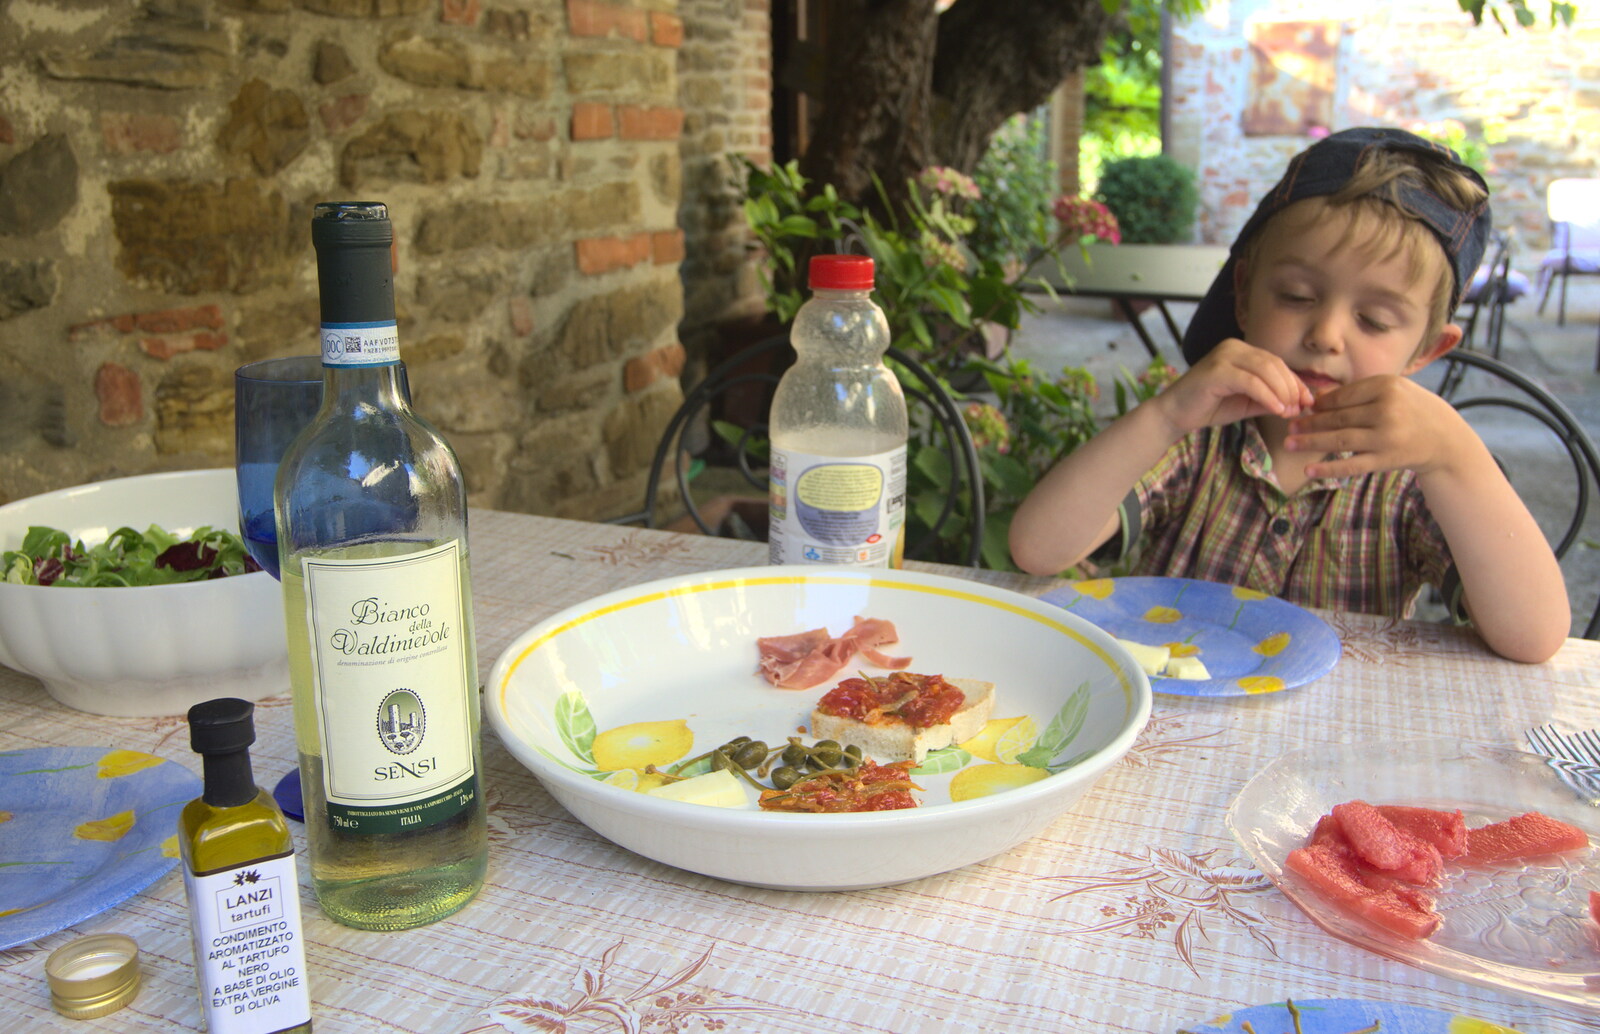 Fred eats his favourite of the moment: salami from La Verna Monastery and the Fireflies of Tuscany, Italy - 14th June 2013